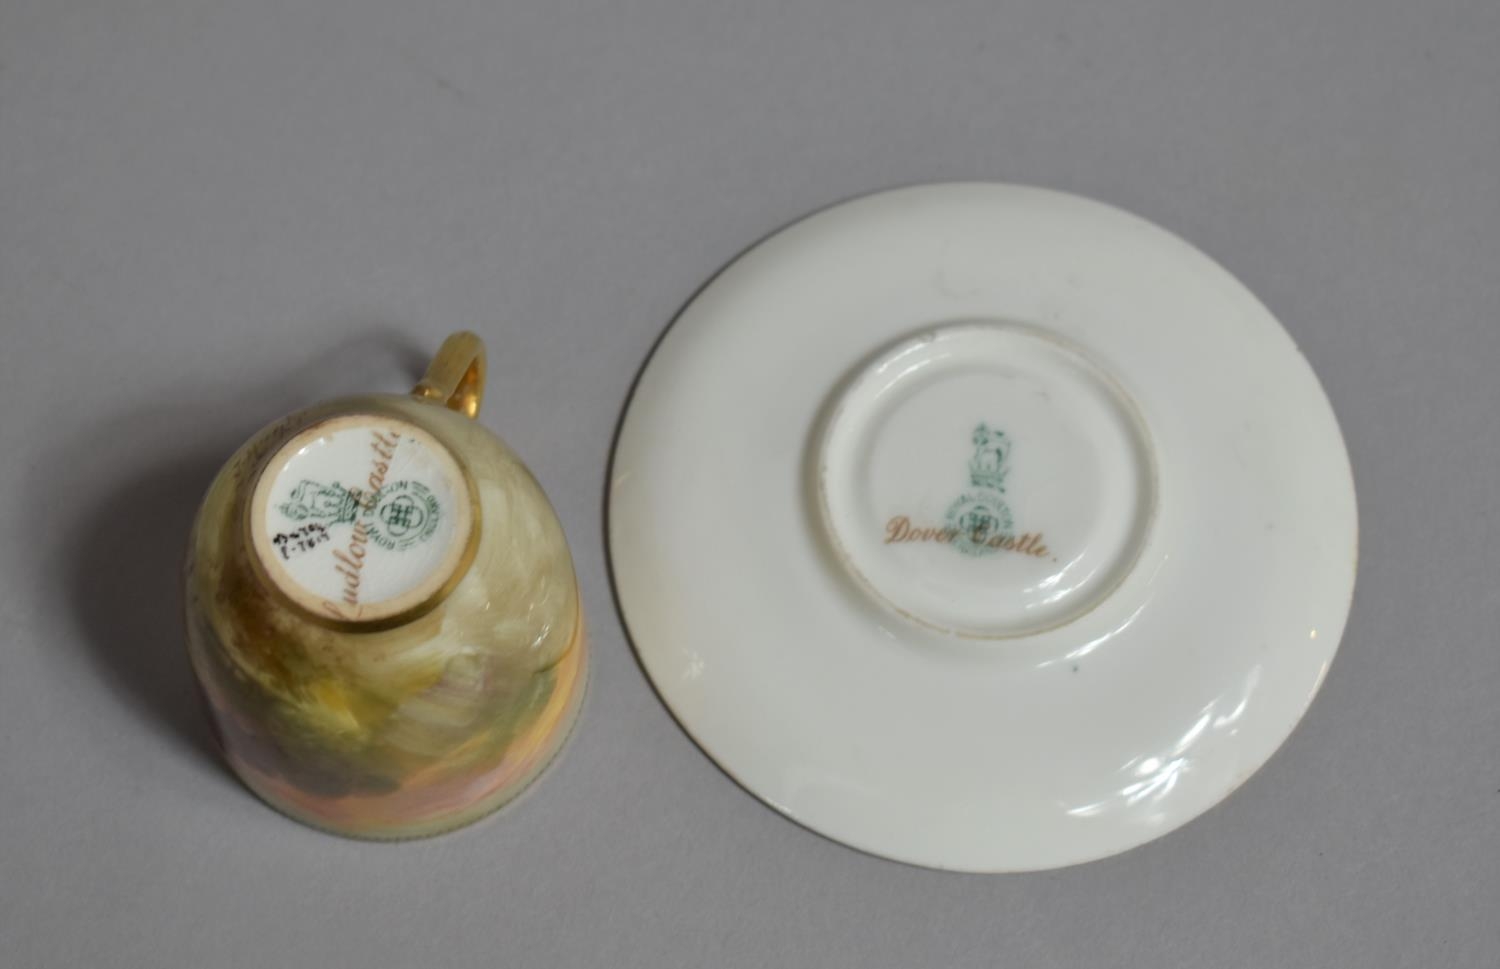 A Miniature Royal Doulton Cabinet Cup and Saucer, Hand Painted Ludlow Castle Design by J Hughes - Image 3 of 3